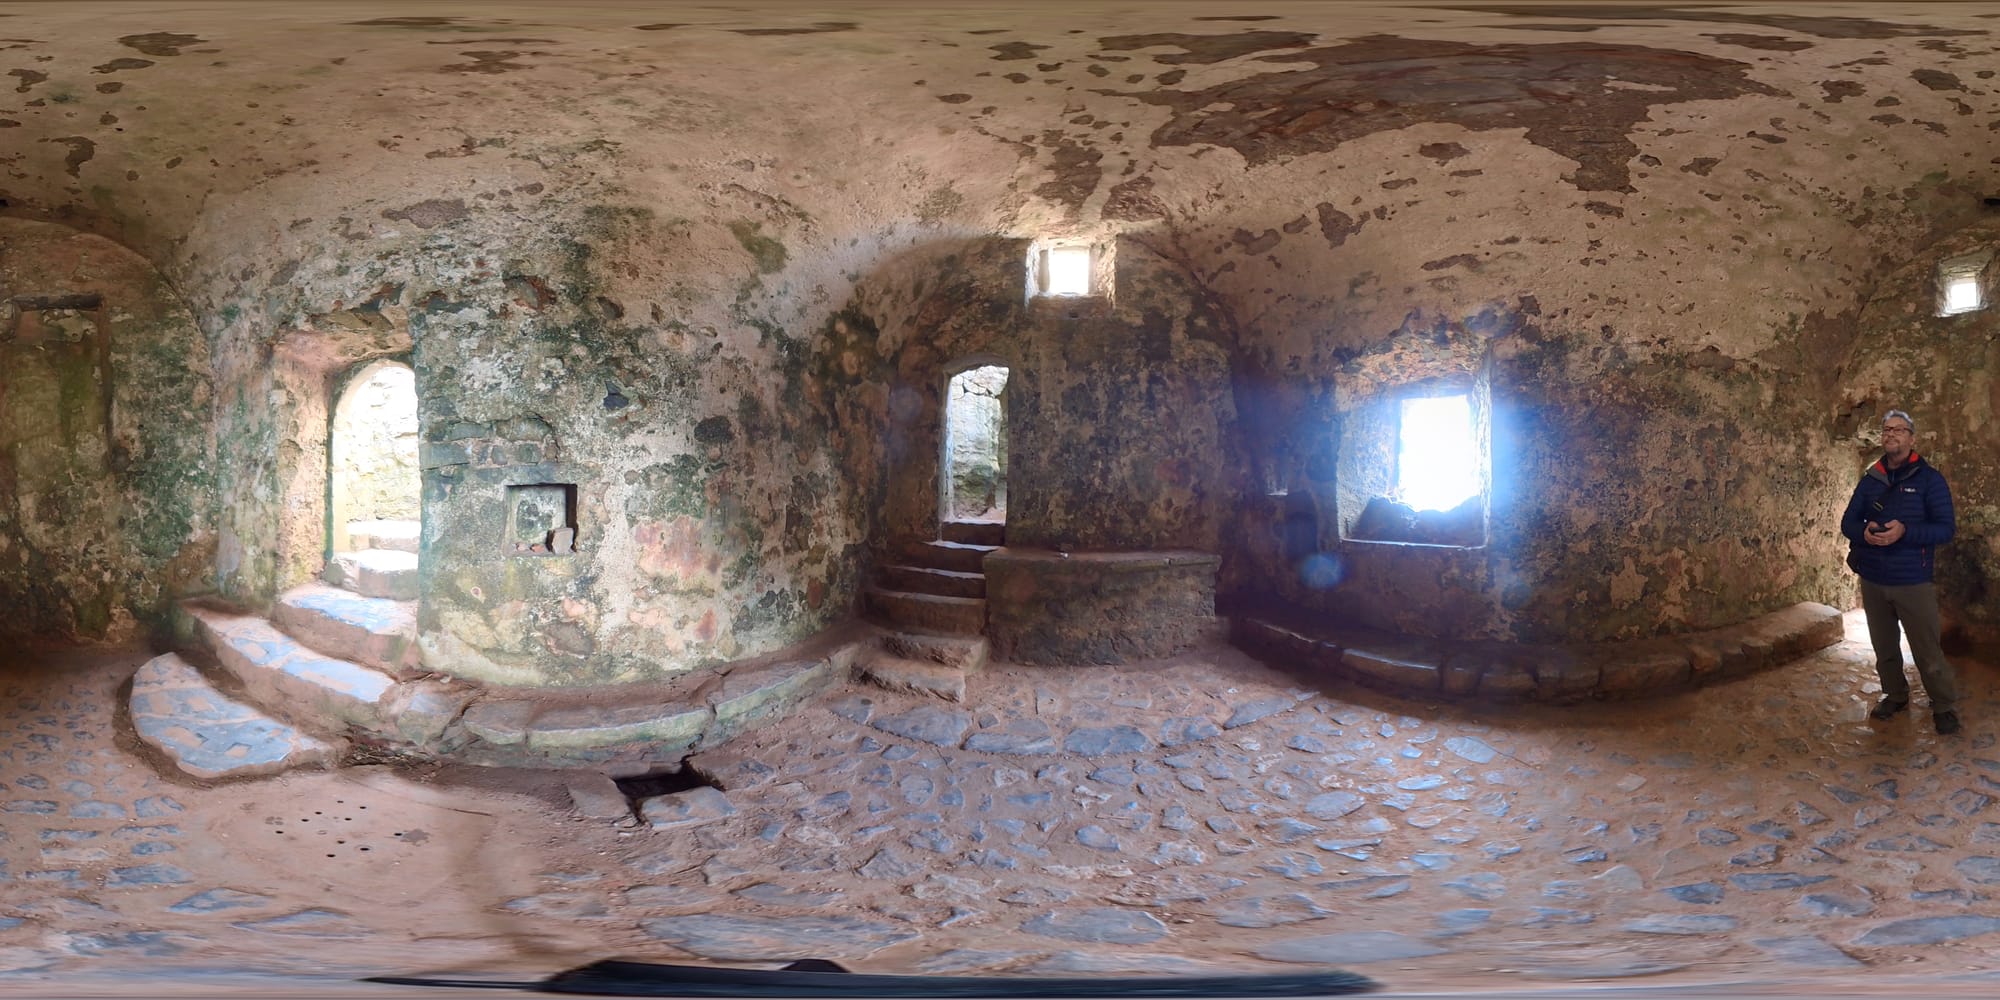 Be there: Interior of St. Govan's Chapel, Pembrokeshire in glorious VR.